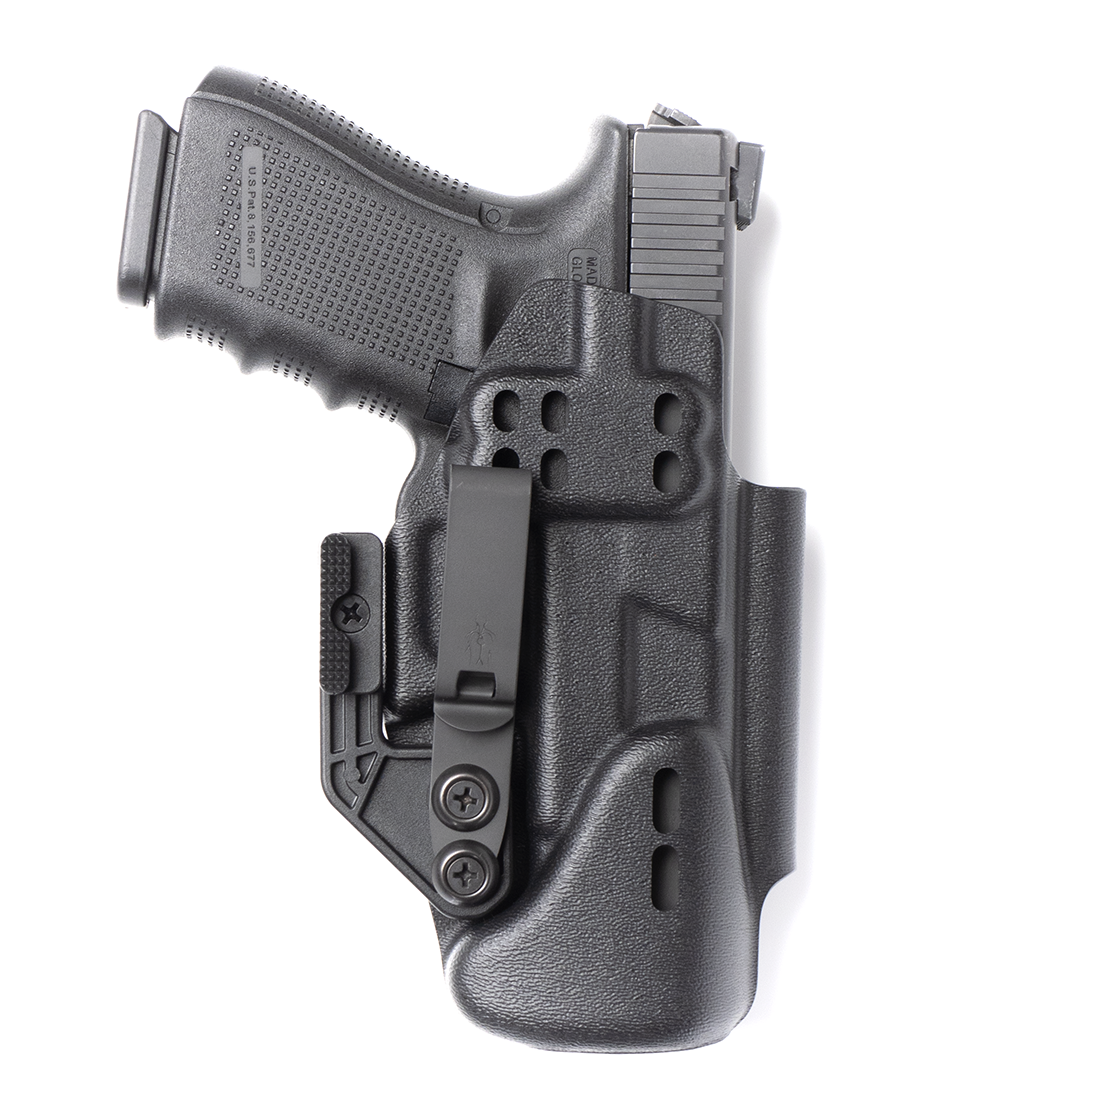 MADE IN USAIWB Conceal Carry CCW Holster w/ Sweat Guard for Glock 29 30 43